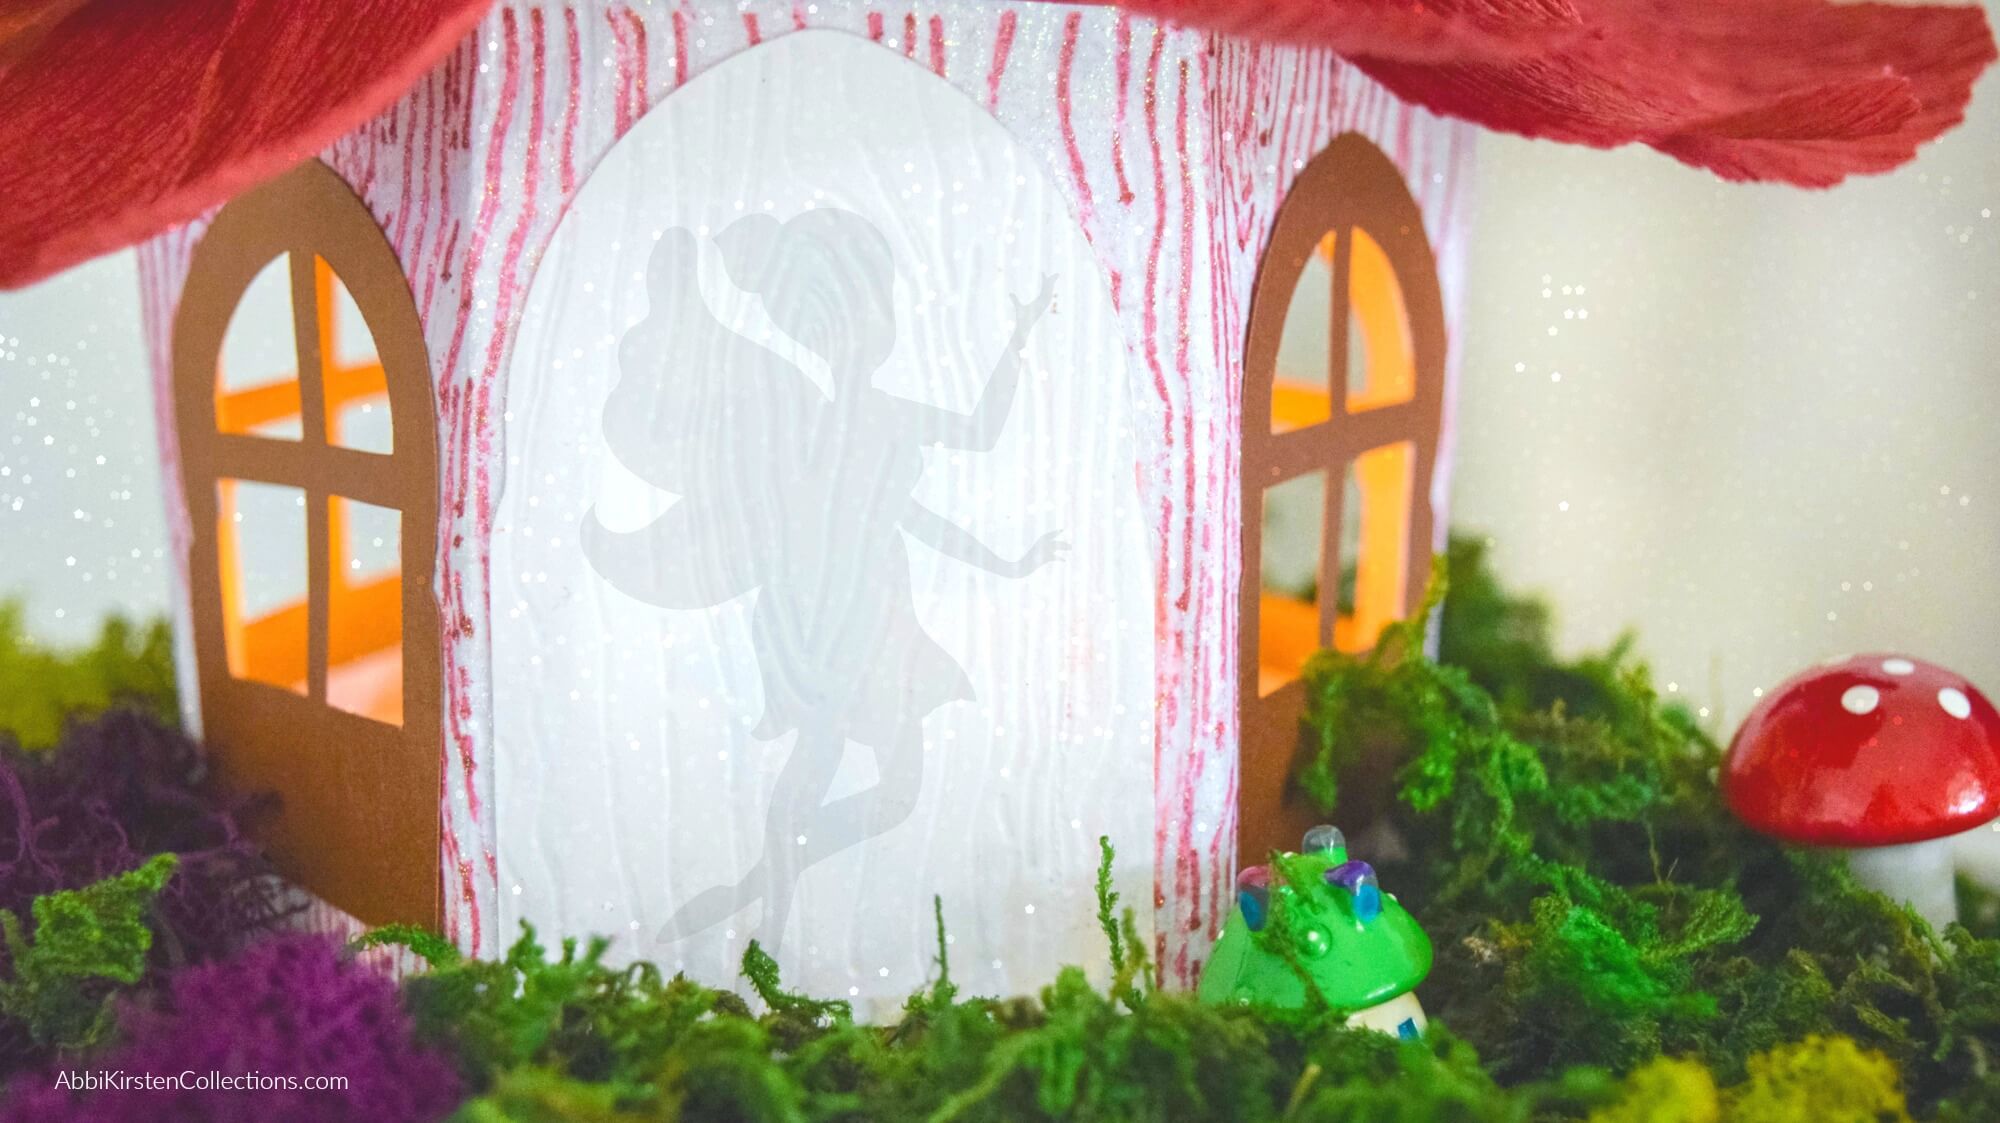 A closeup image of the door on a DIY fairy house, with a silhouette of a tiny, winged fairy dancing in the doorway. The house has paper windows, a crepe paper flower roof, and faux moss garden around the outside.